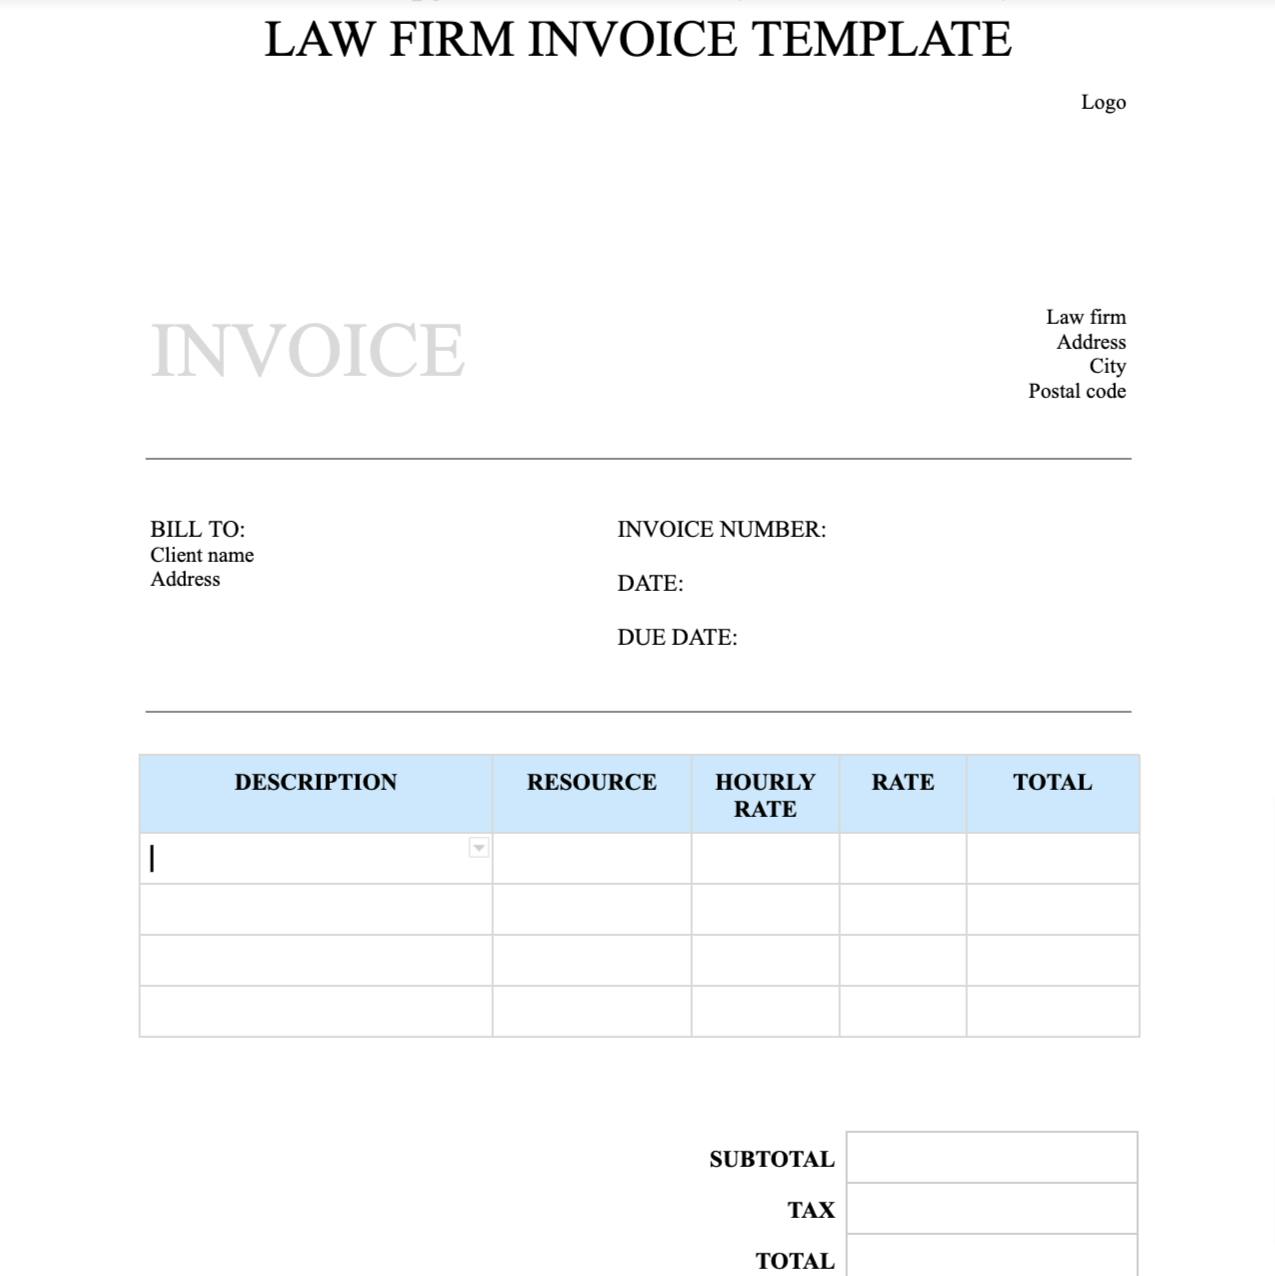 Law firm invoice template in google docs